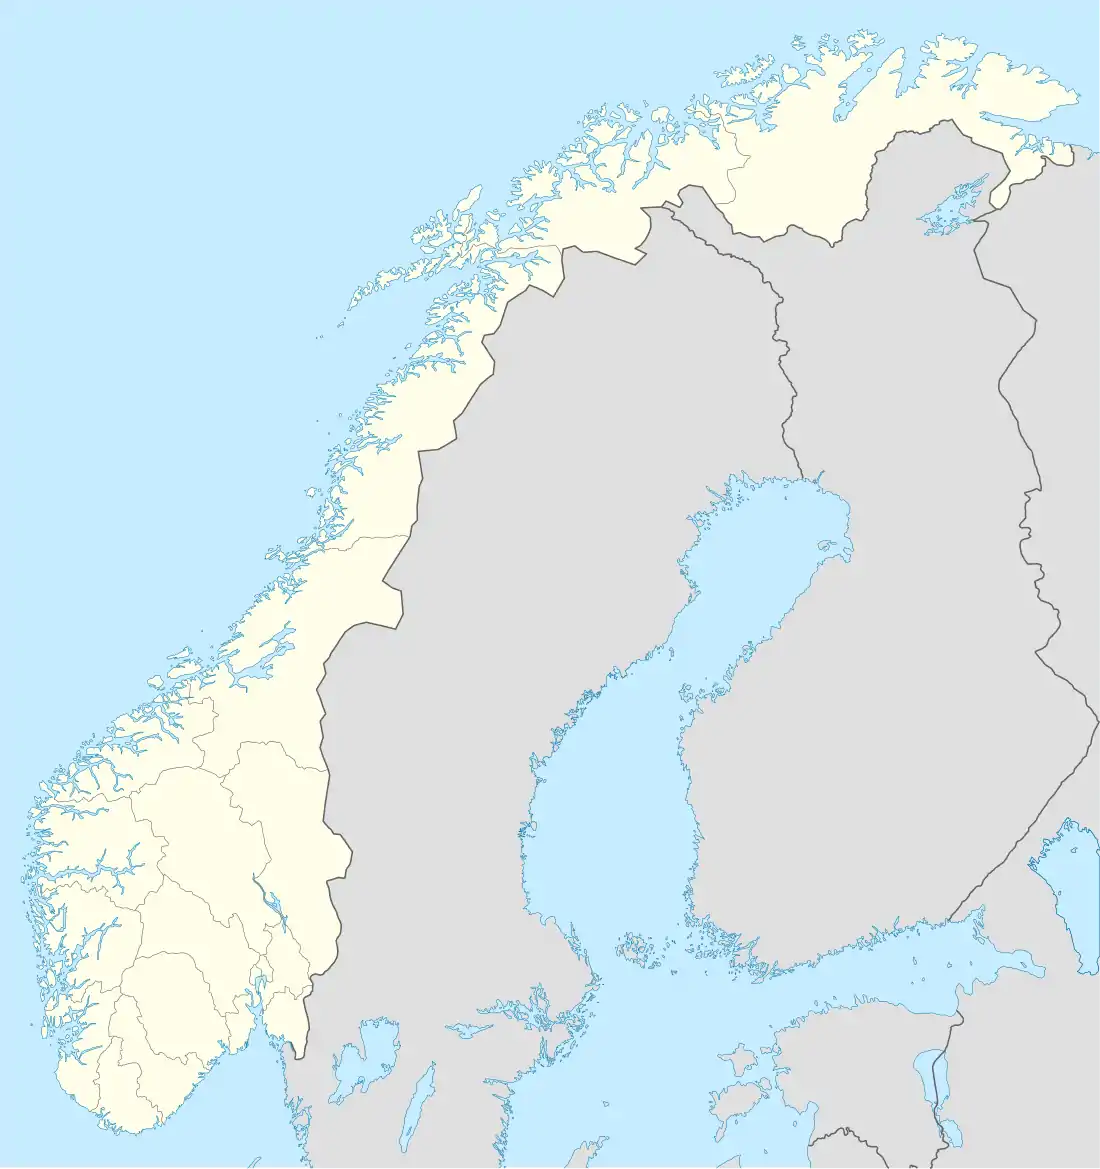 Roverud is located in Norway